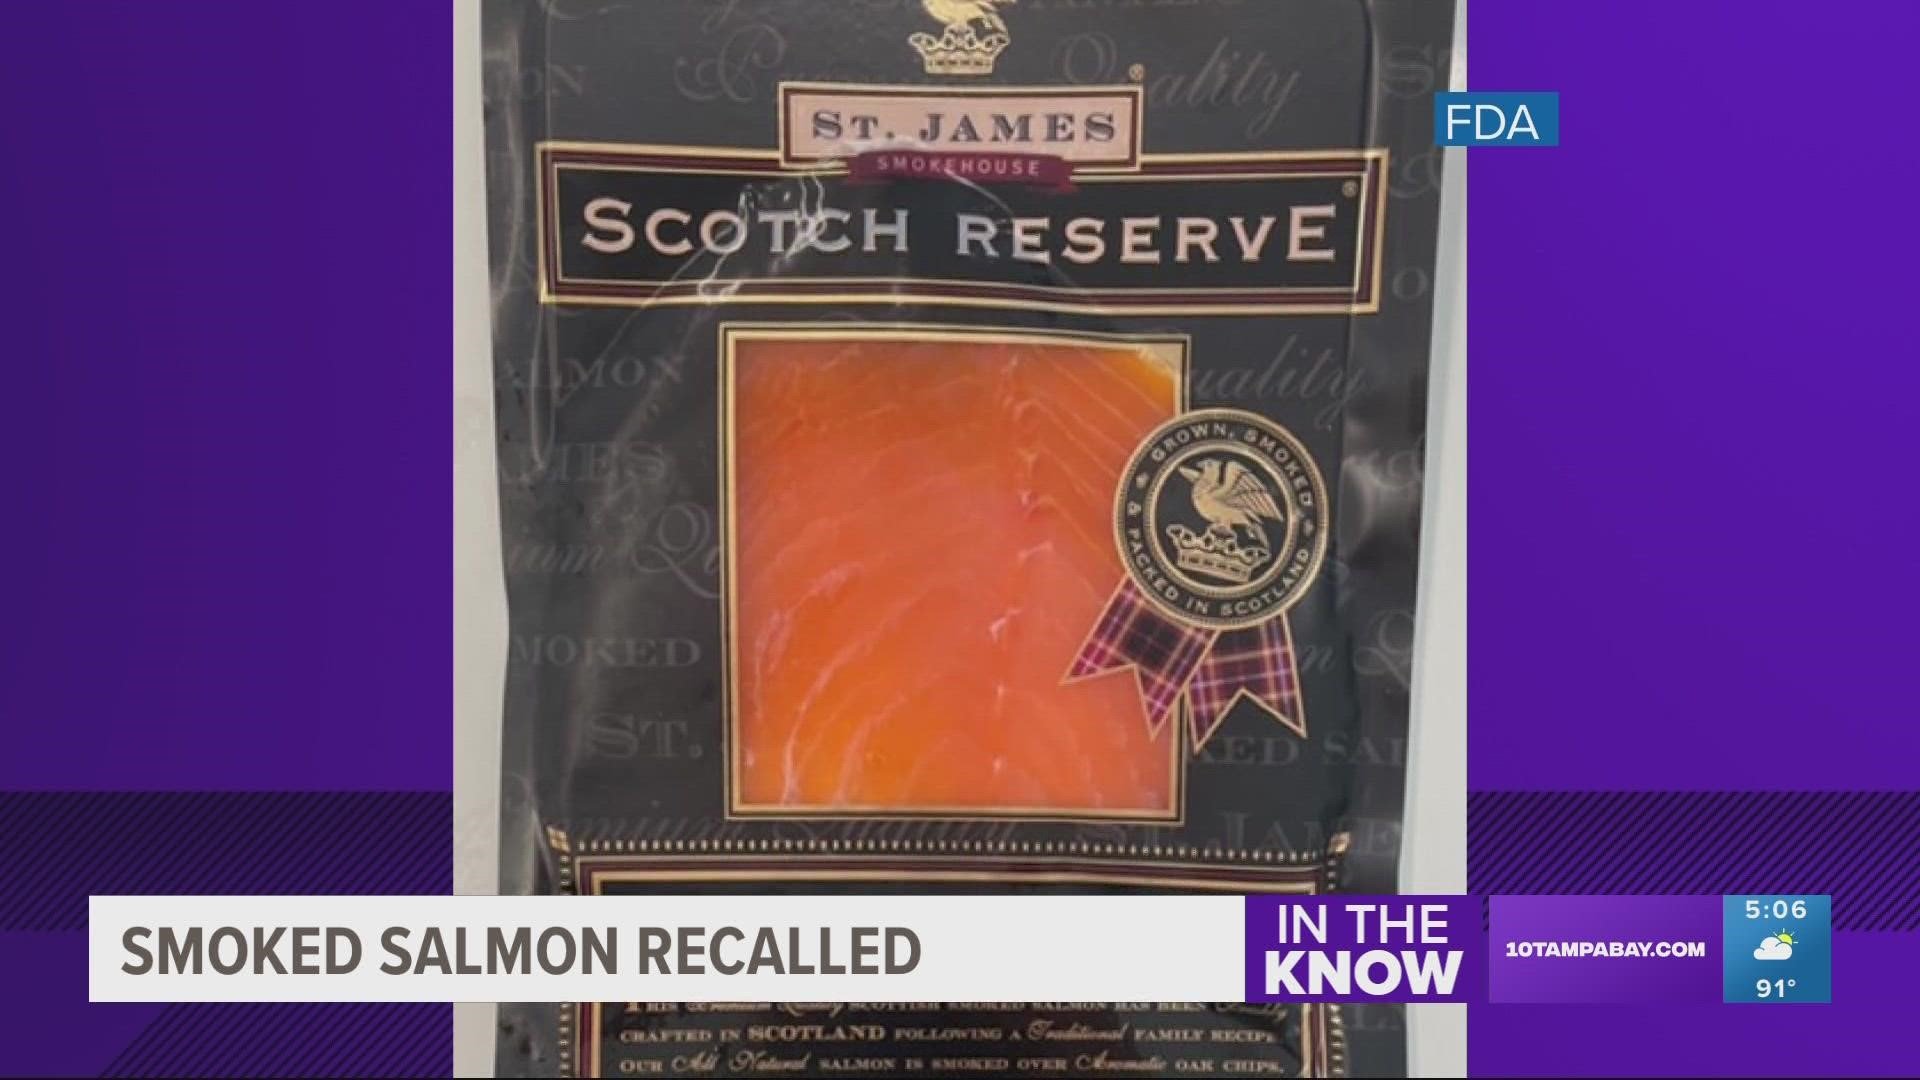 Any customers who have bought the contaminated salmon should immediately throw it out or return it to the store for a refund.